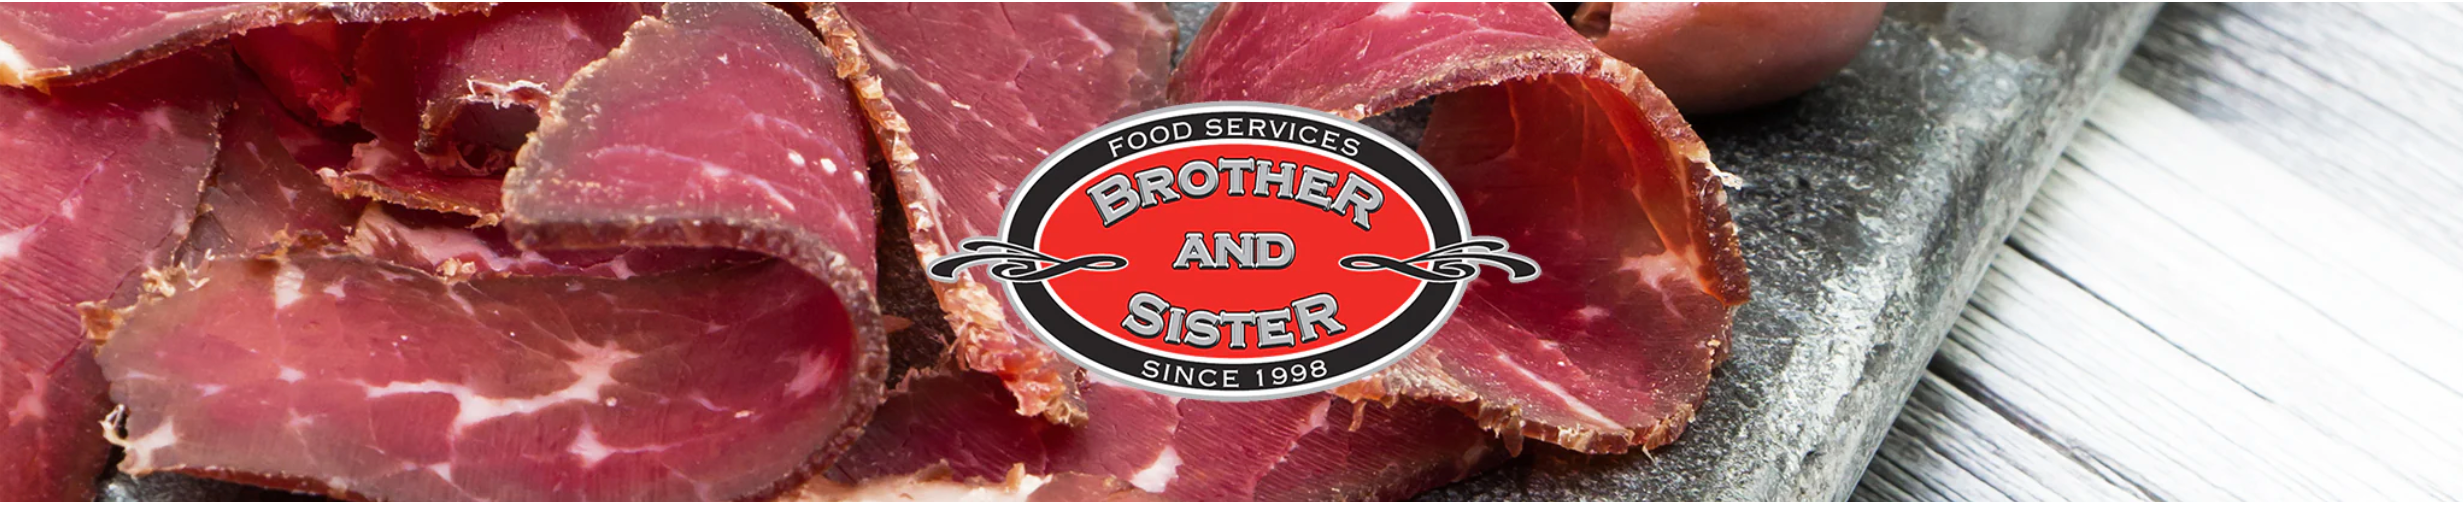 Brother & Sister Smoked Meats - Global Imports & Exports Wholesale